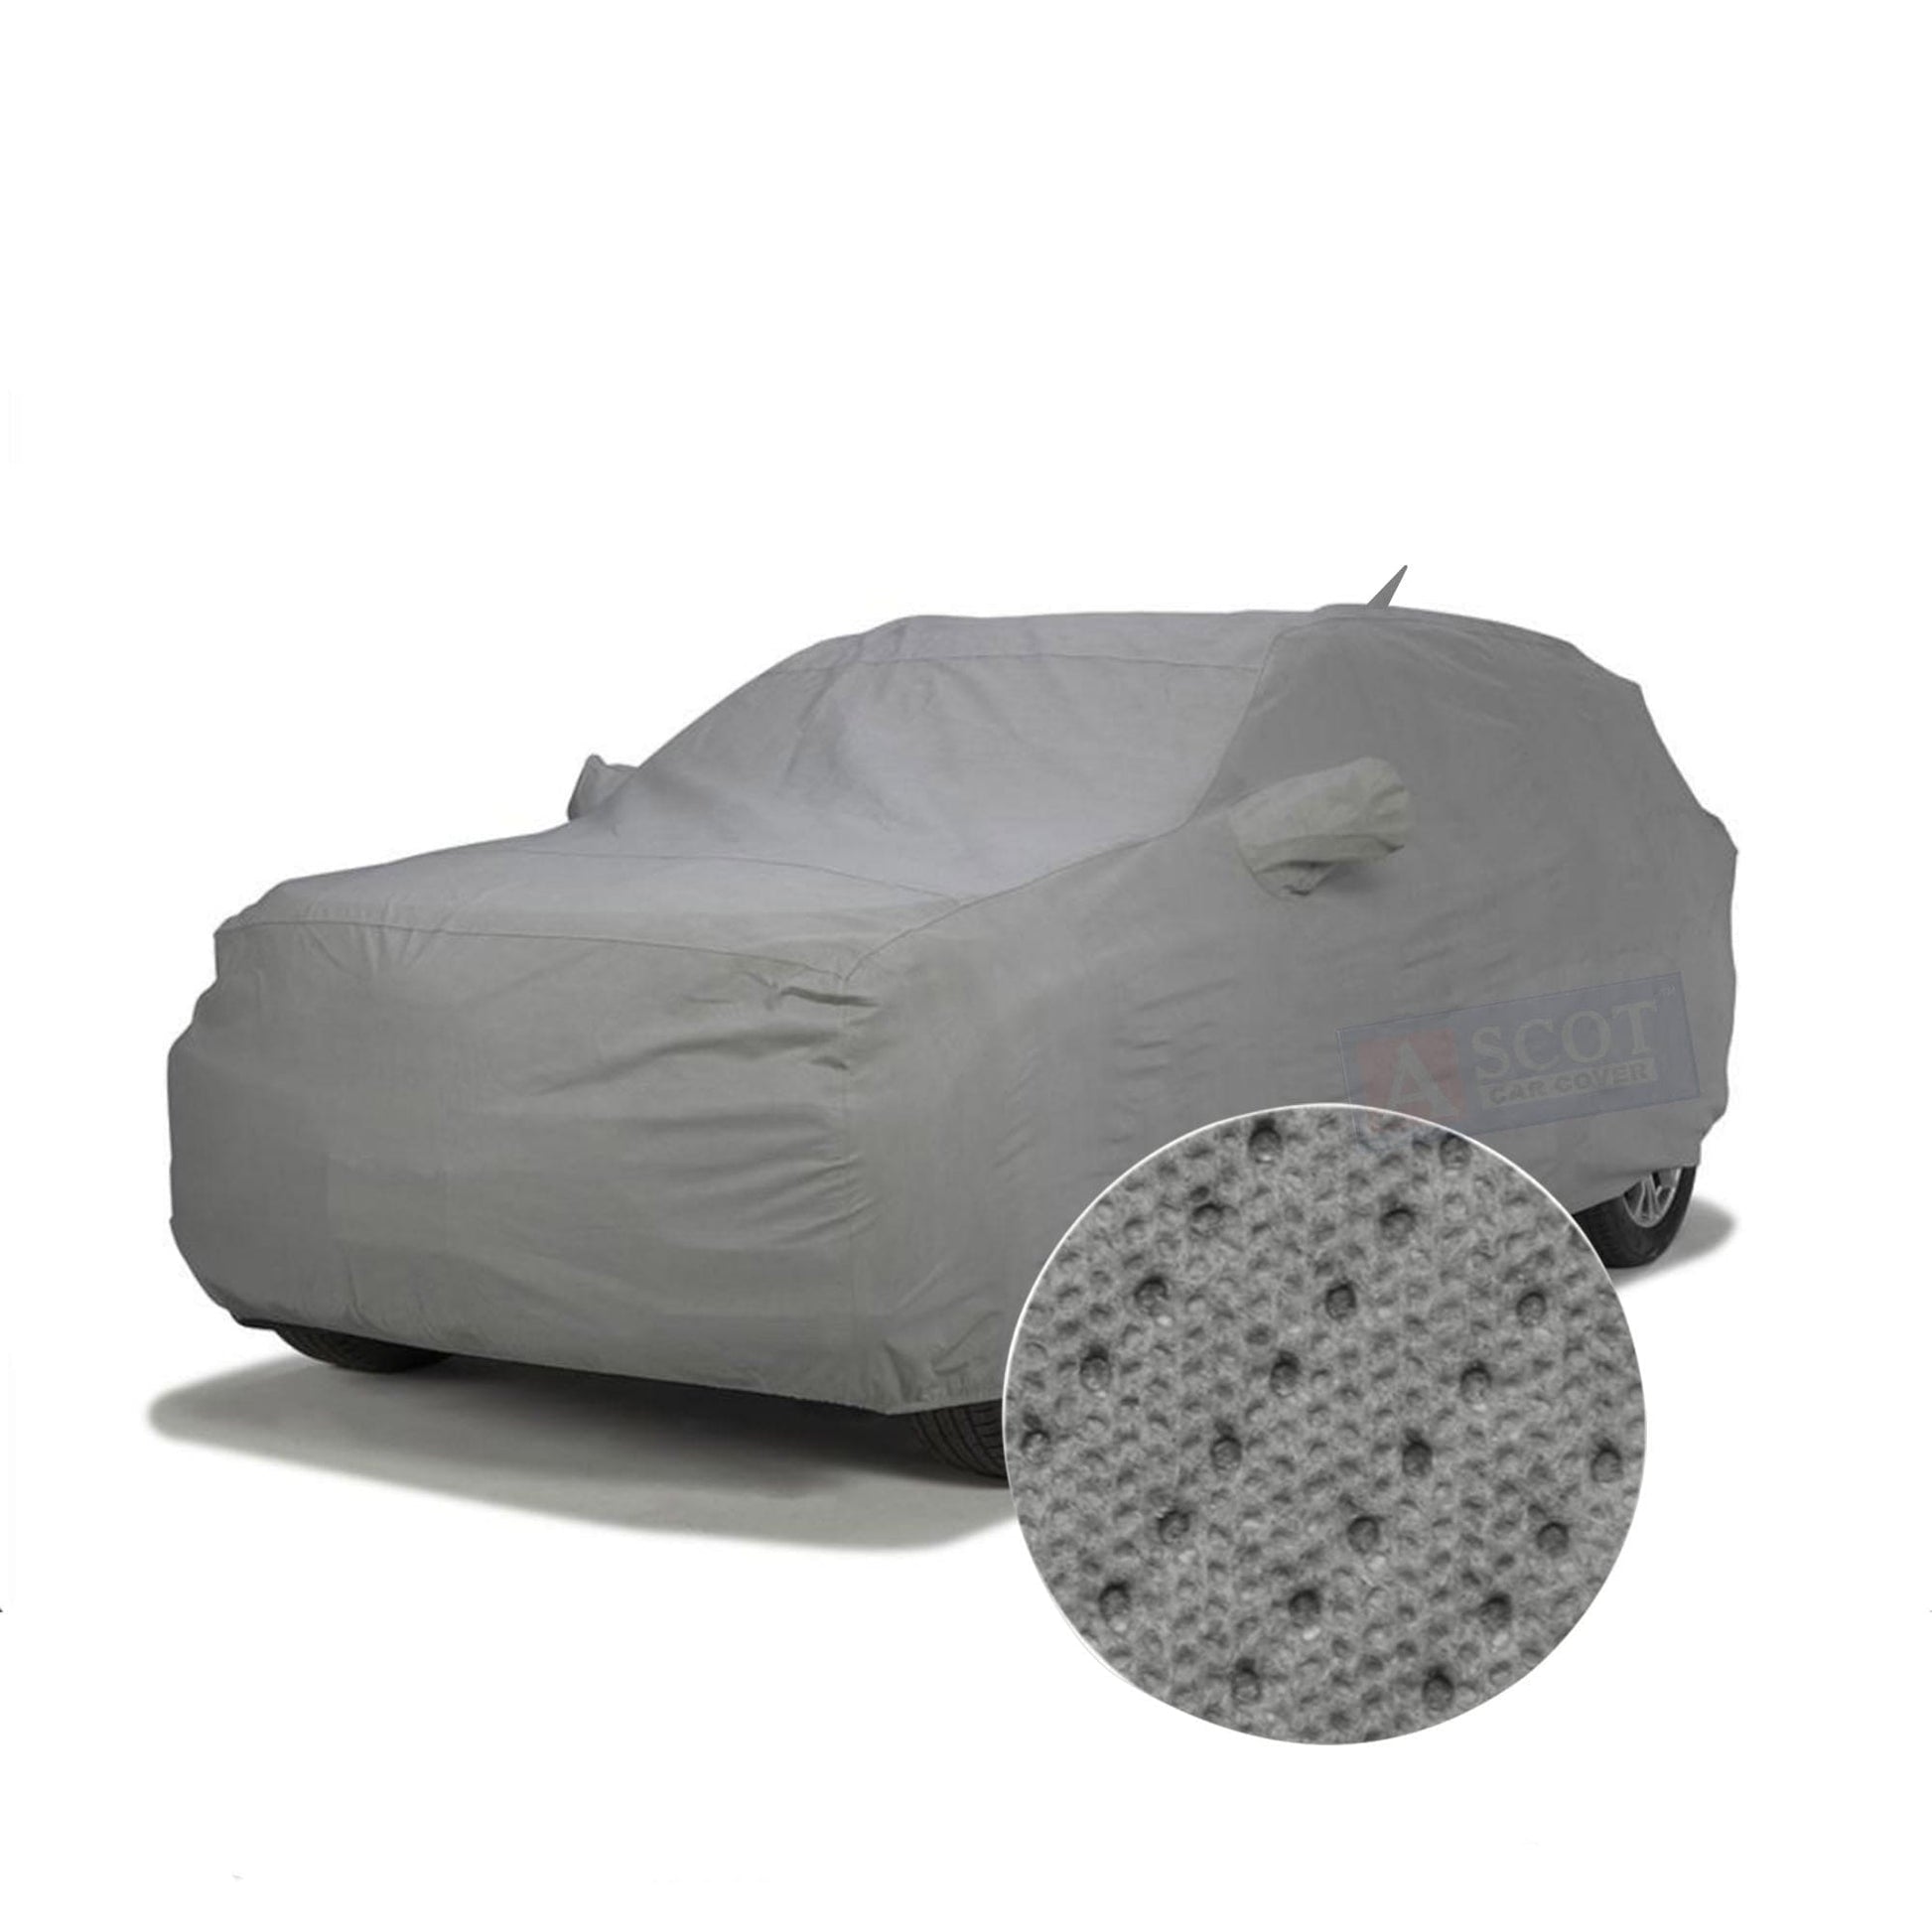 Seal Skin Covers Indoor Car Cover for Compact Cars - Grey